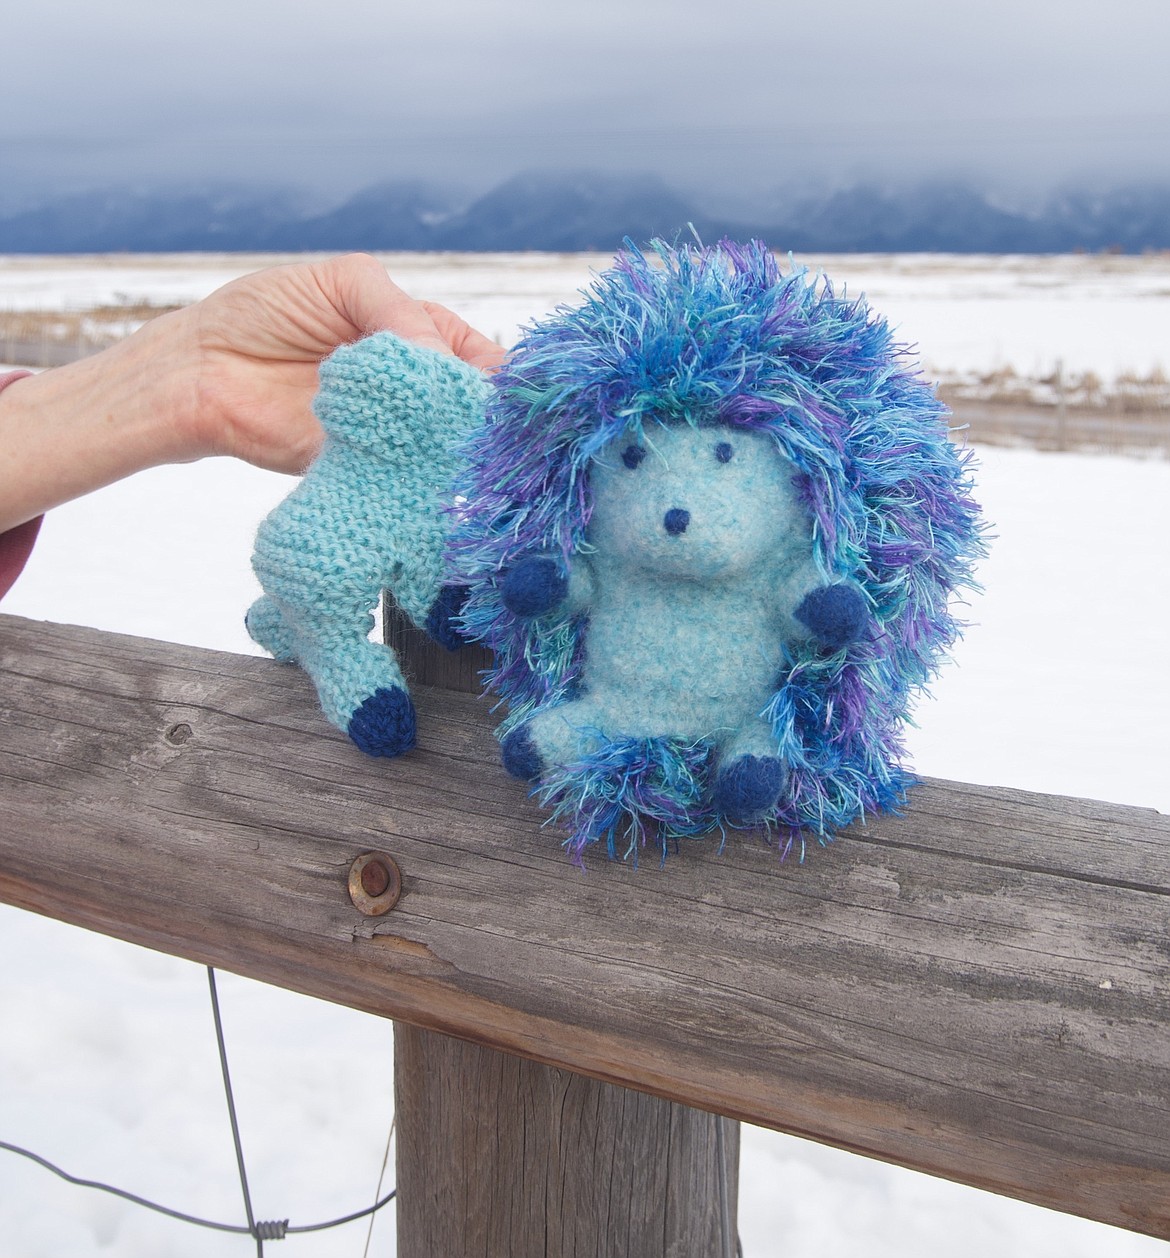 Cute blue hedgehog, perched on a Lorraine Hosler's fence near Charlo, is destined for Logan Health's children's facility in Kalispell. The hand-knitted form at left will be felted to make the front of another cute little fella. (Kristi Niemeyer/Leader)